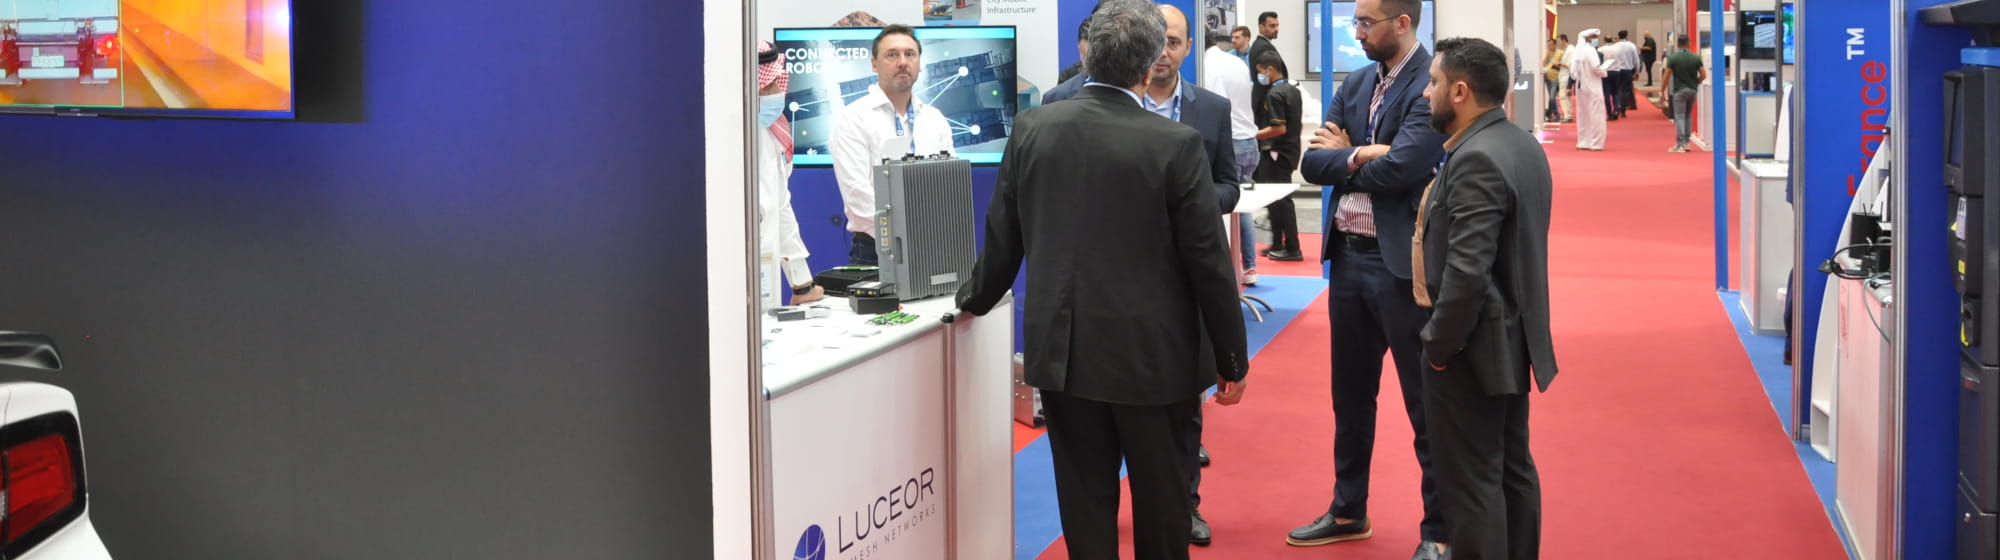 Visitors on the Novatel Networks - Luceor's stand at Milipol Qatar